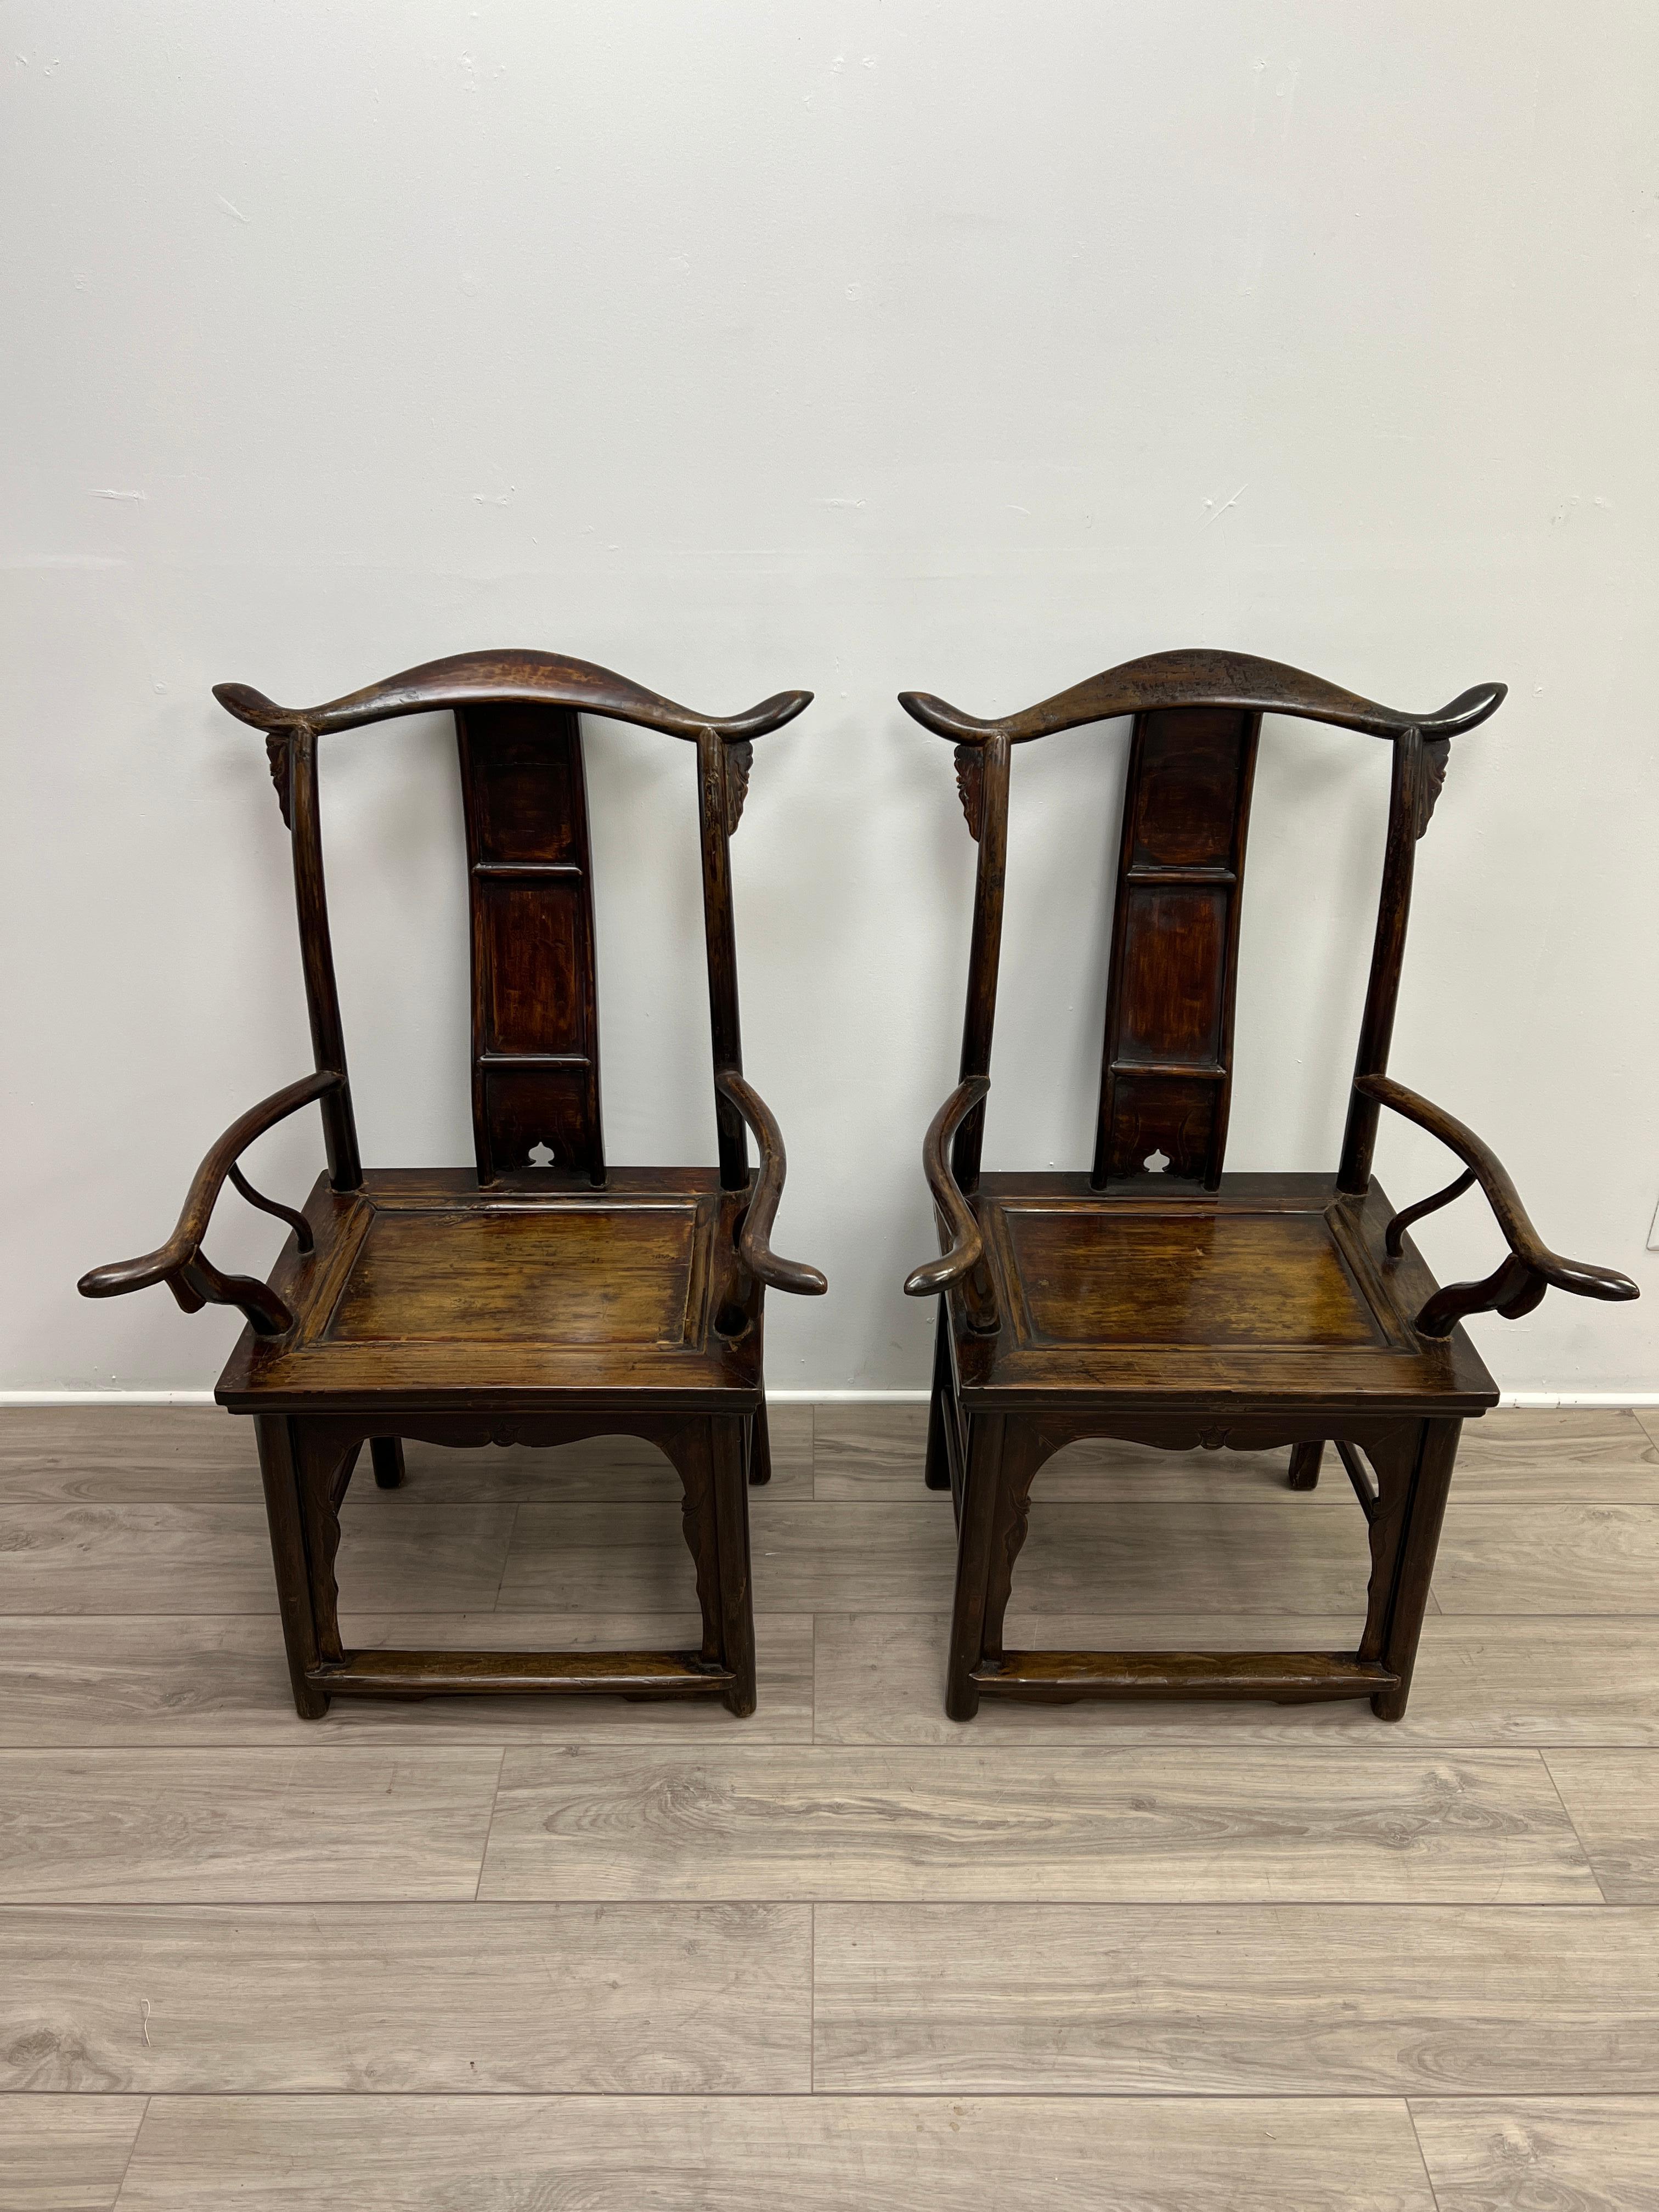 This is a very handsome and sumptous pair of Qing dynasty (1644-1912) Yoke back officials hat chairs. The pair is constructed of Chinese pear, Huanghuali ('yellow flowering pear'), or huali is from the rosewood family. The colours range from a